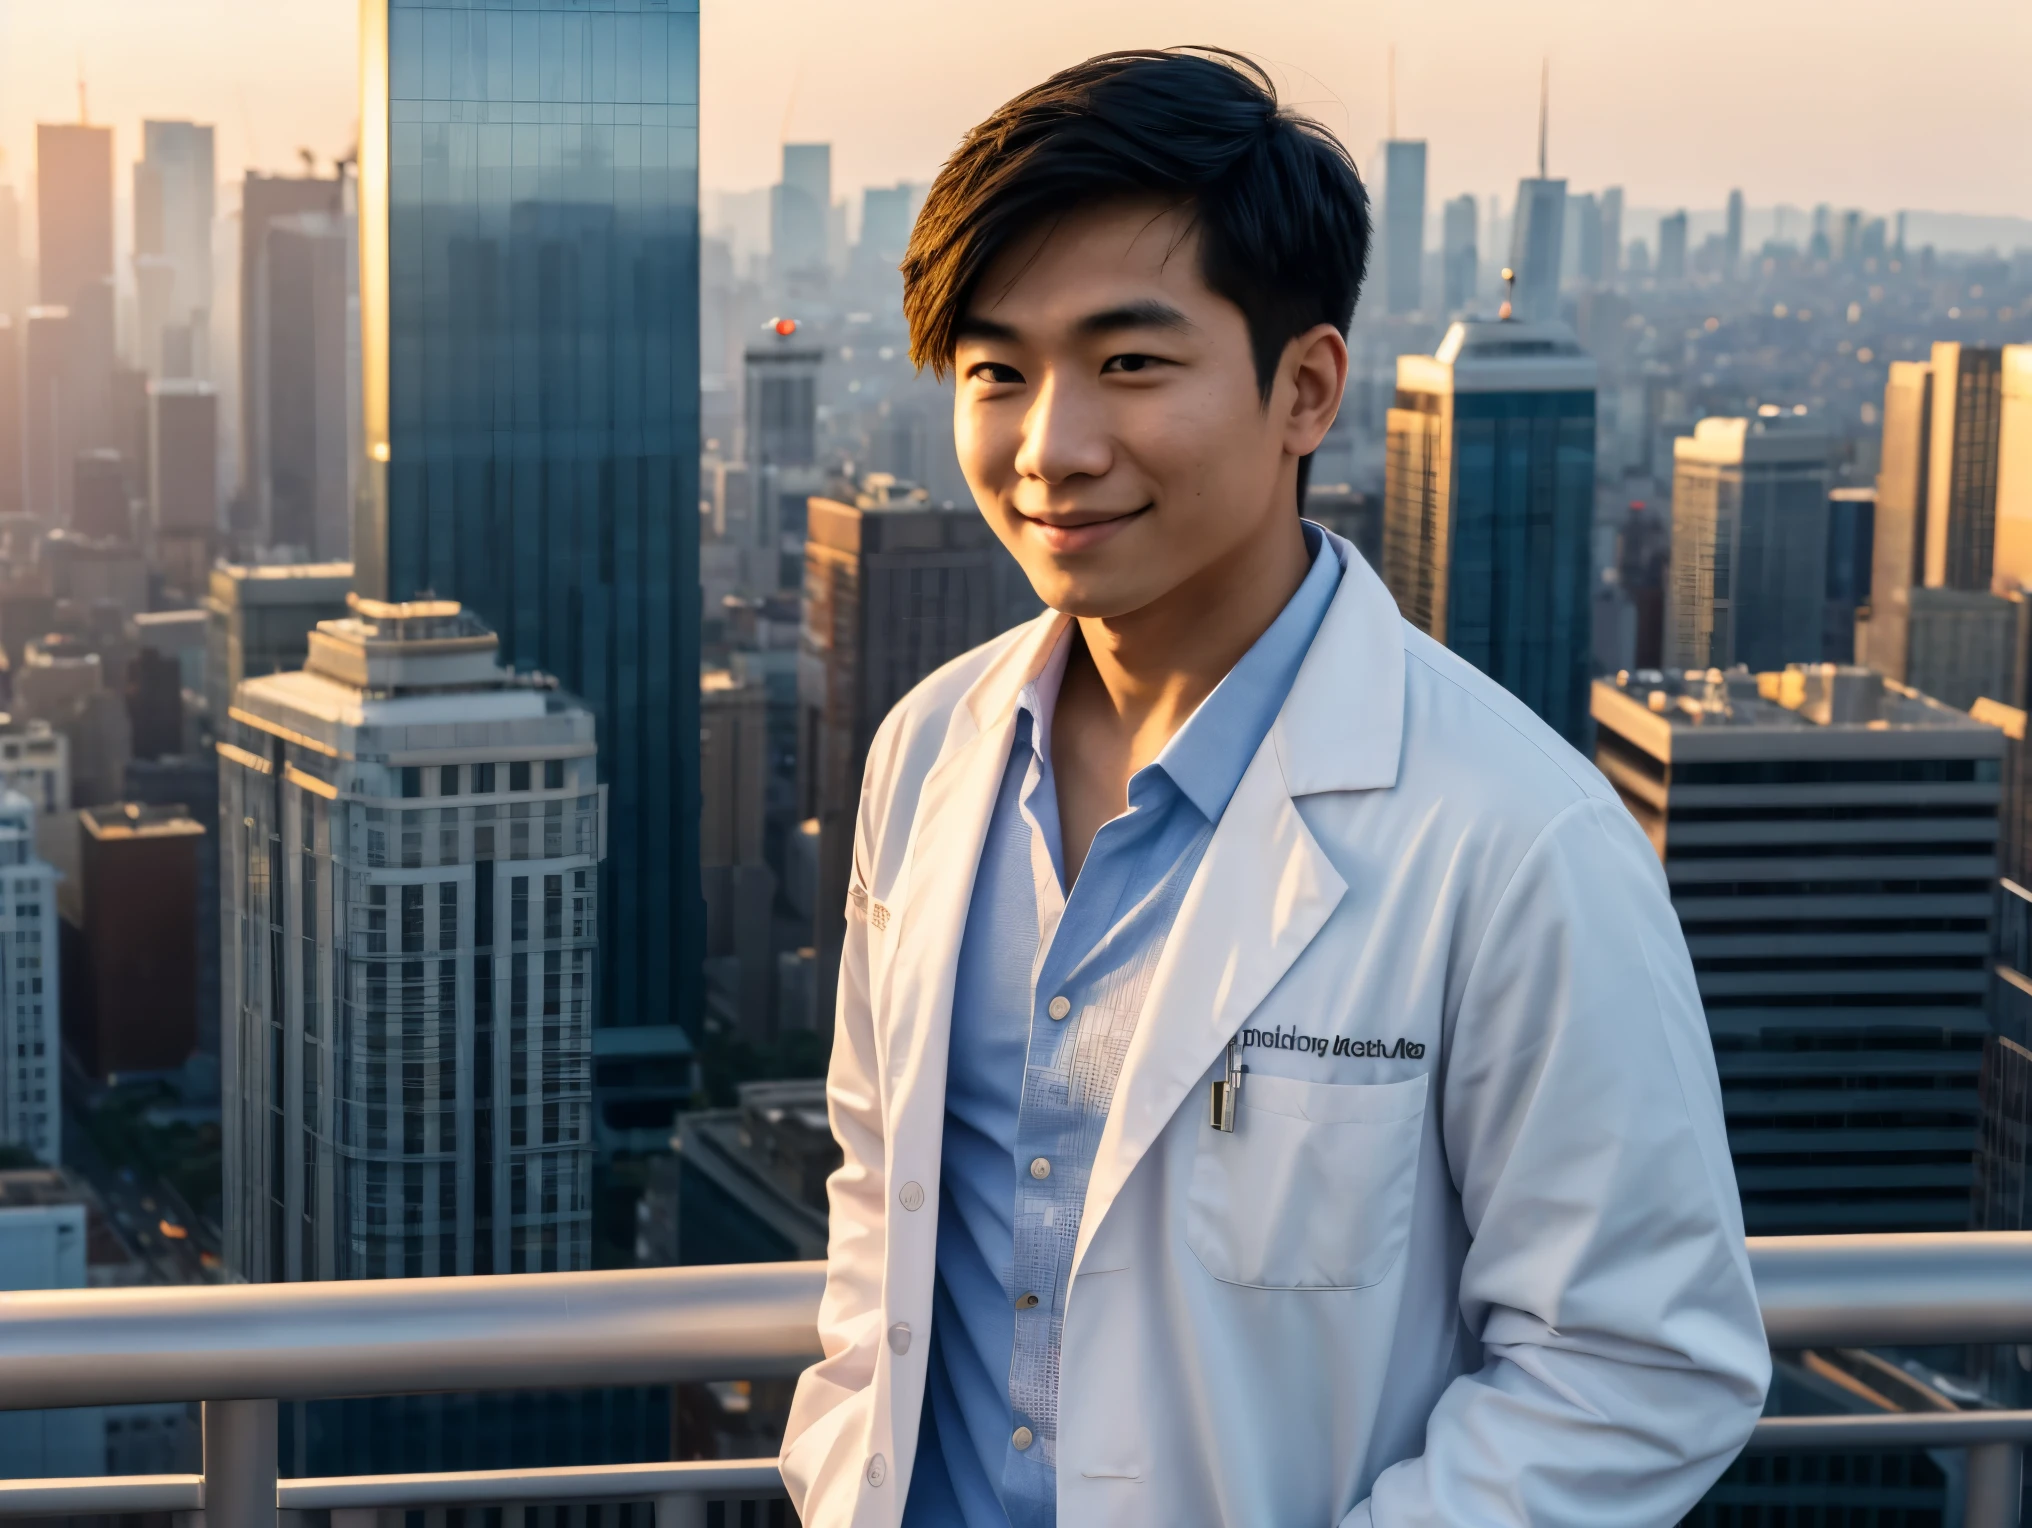 Imagine a young Asian male doctor standing proudly on a rooftop at sunset. He's wearing a crisp white lab coat, and the golden light of the setting sun warms his face. Behind him, the cityscape stretches out with skyscrapers and bustling streets. He has a slight smile of contentment, looking out over the city in quiet reflection.